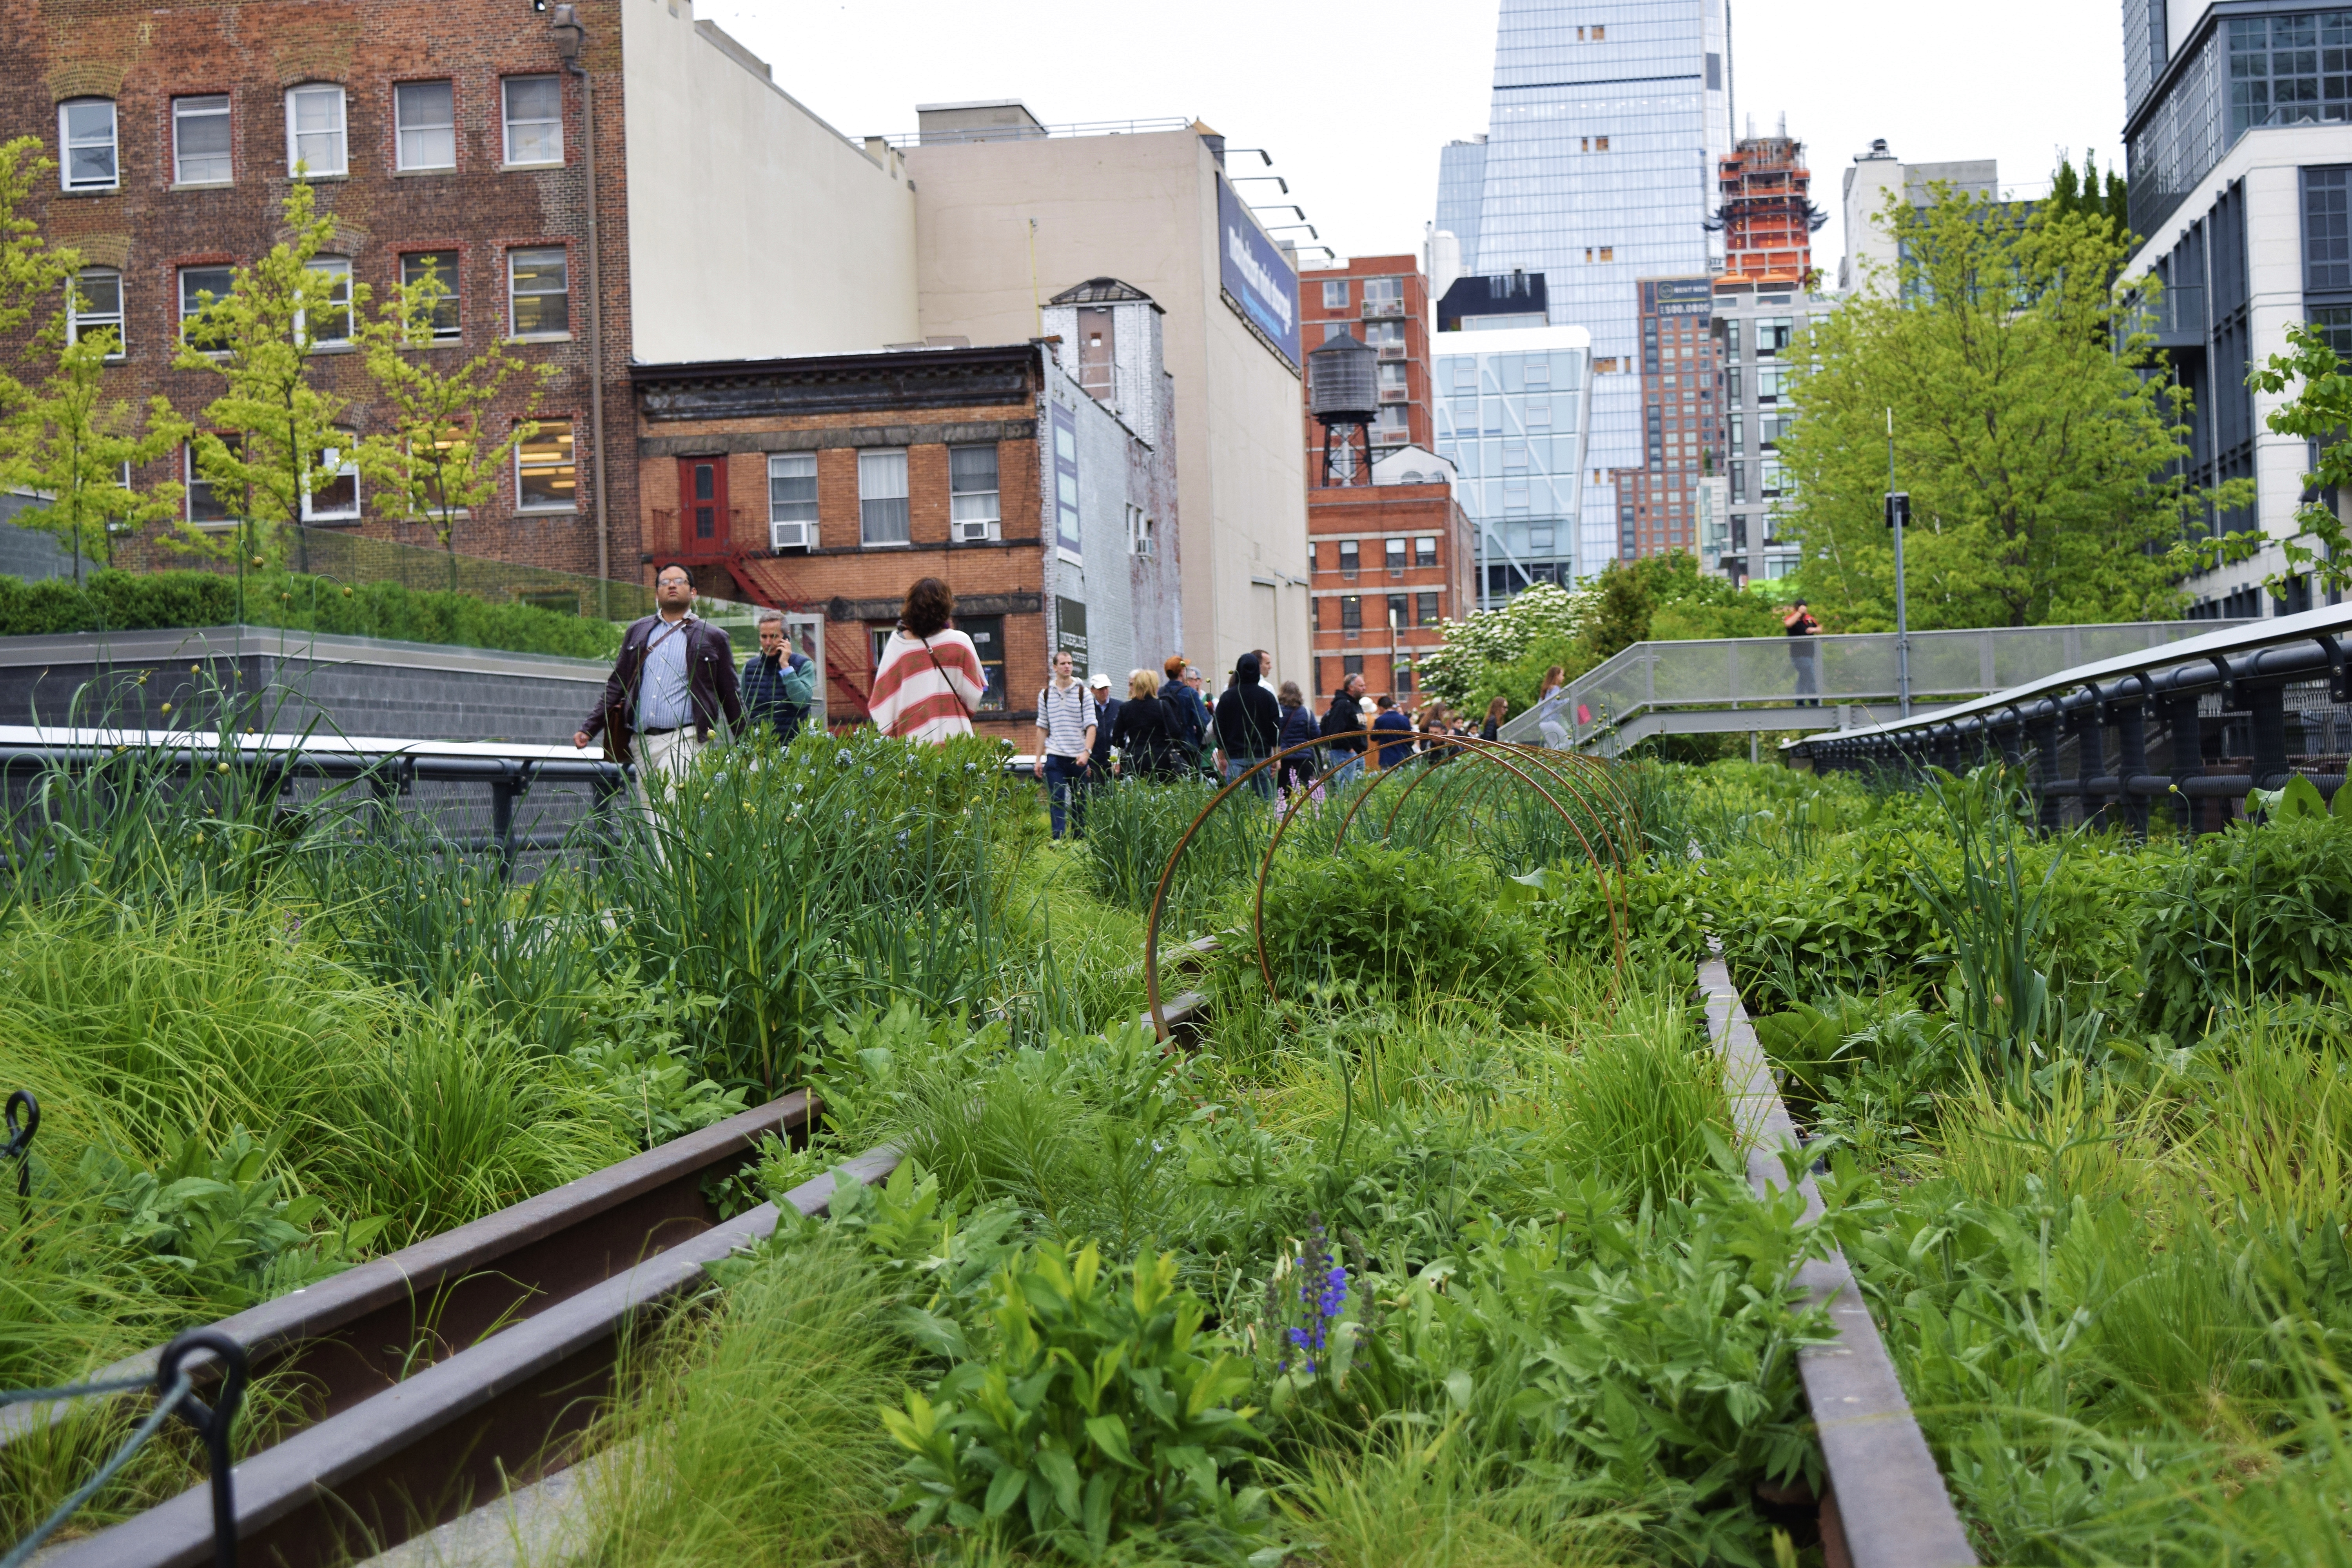 A shot on the High Line in the neighborhood of Chelsea in NYC.